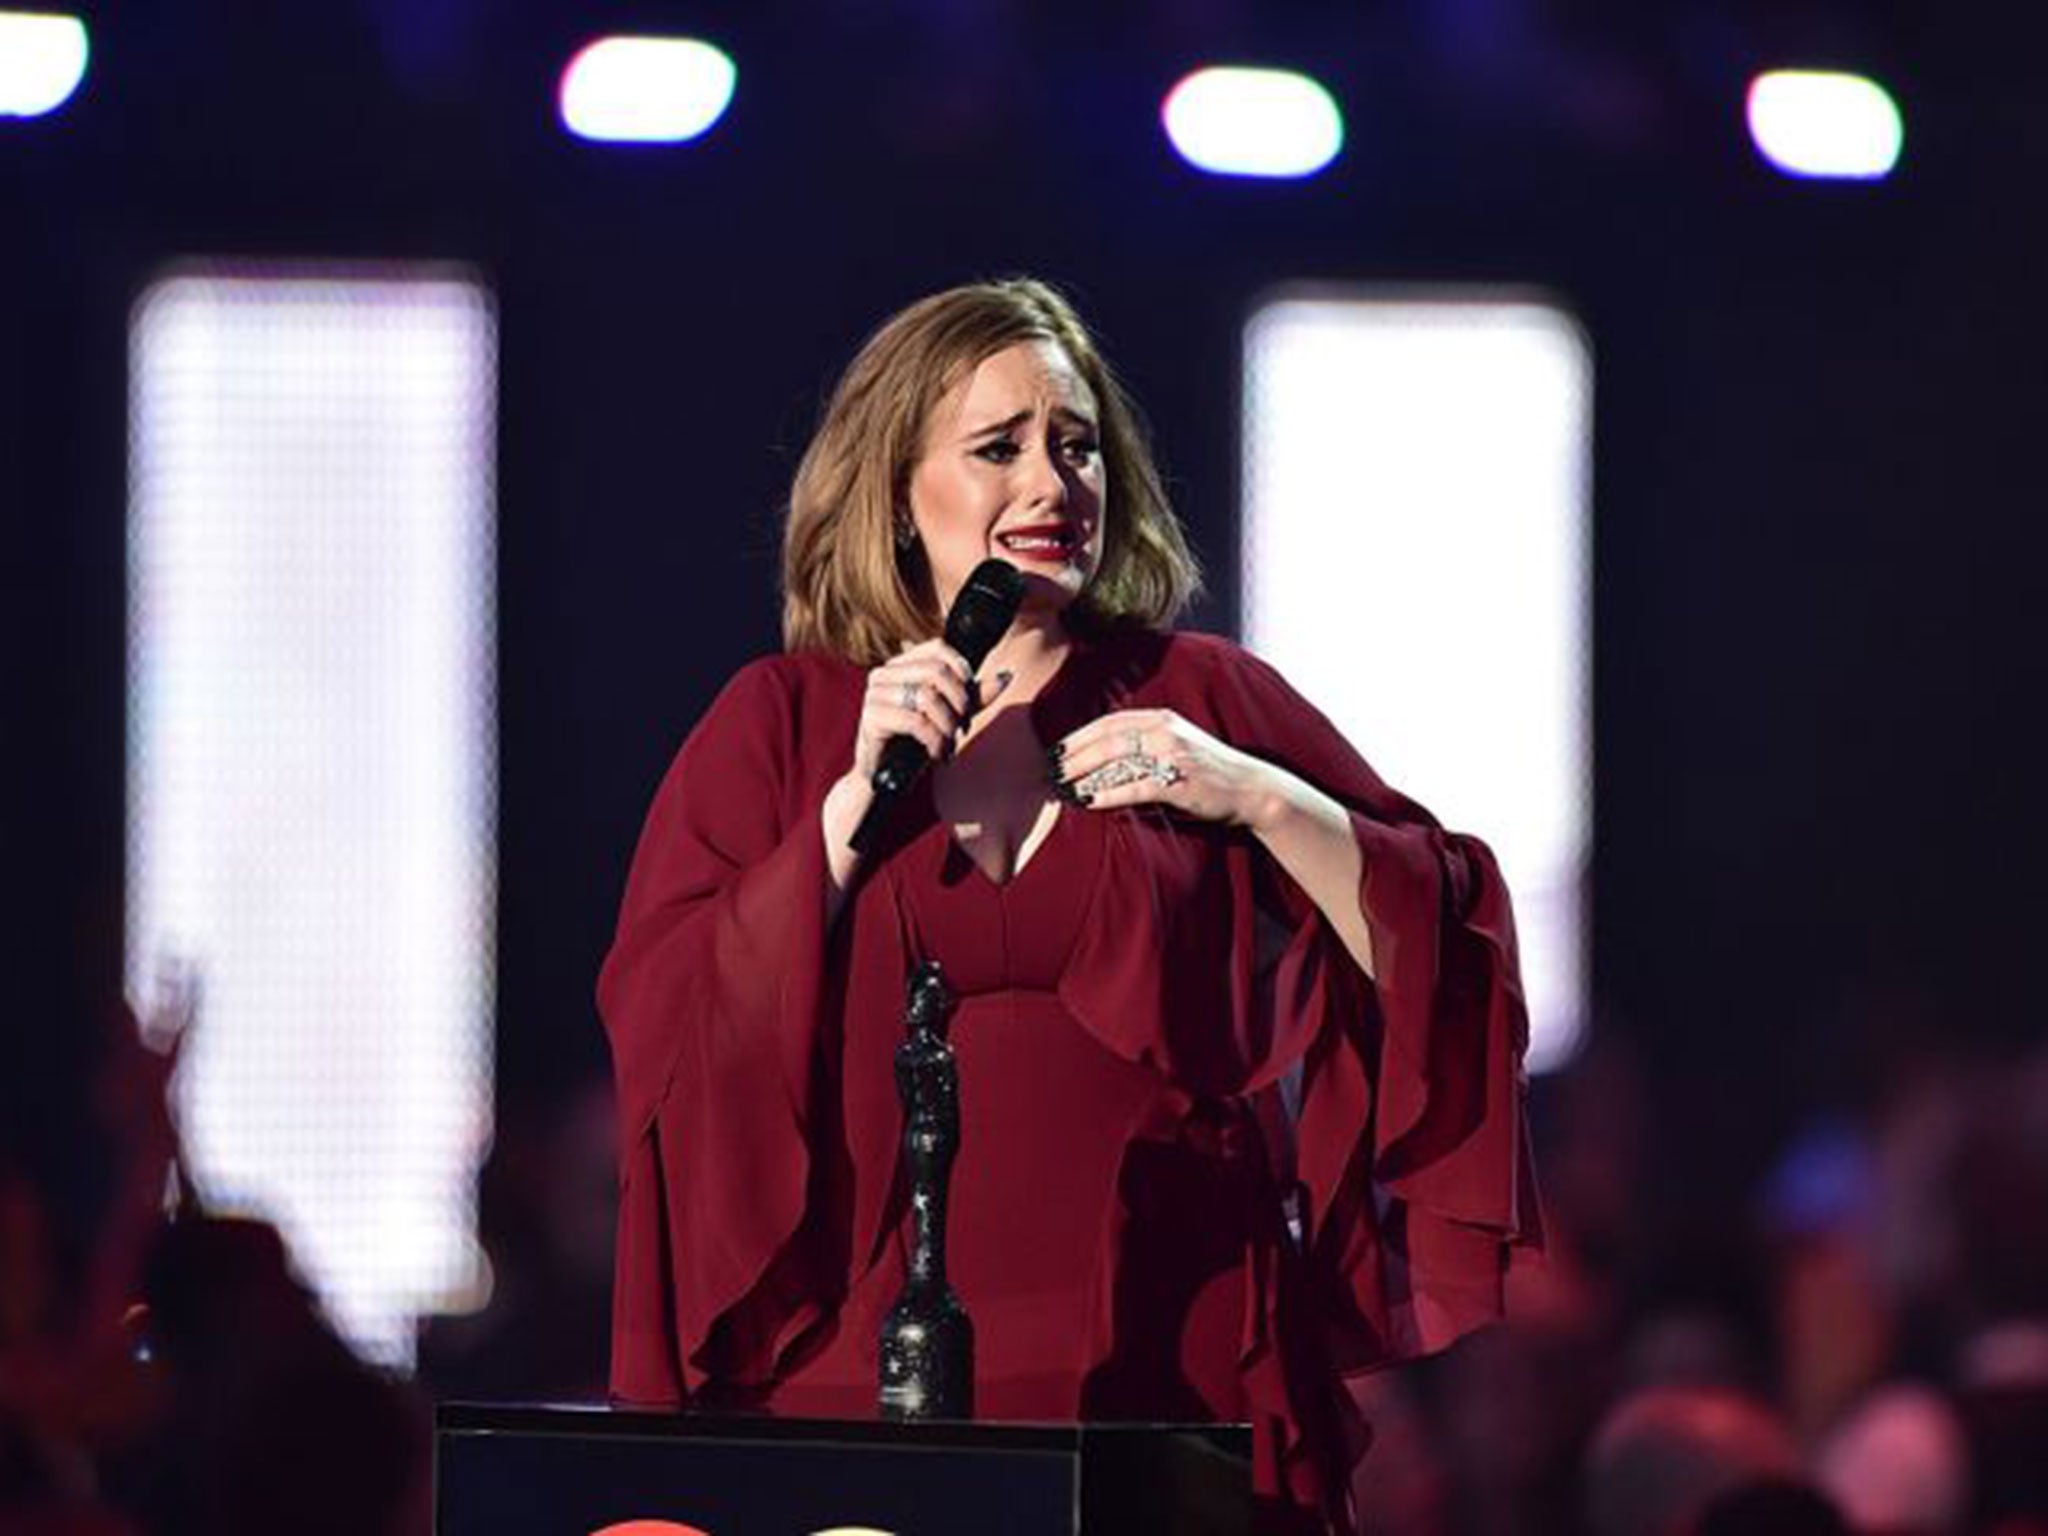 Mis-beeped: Adele’s swearing at the Brit Awards drew complaints